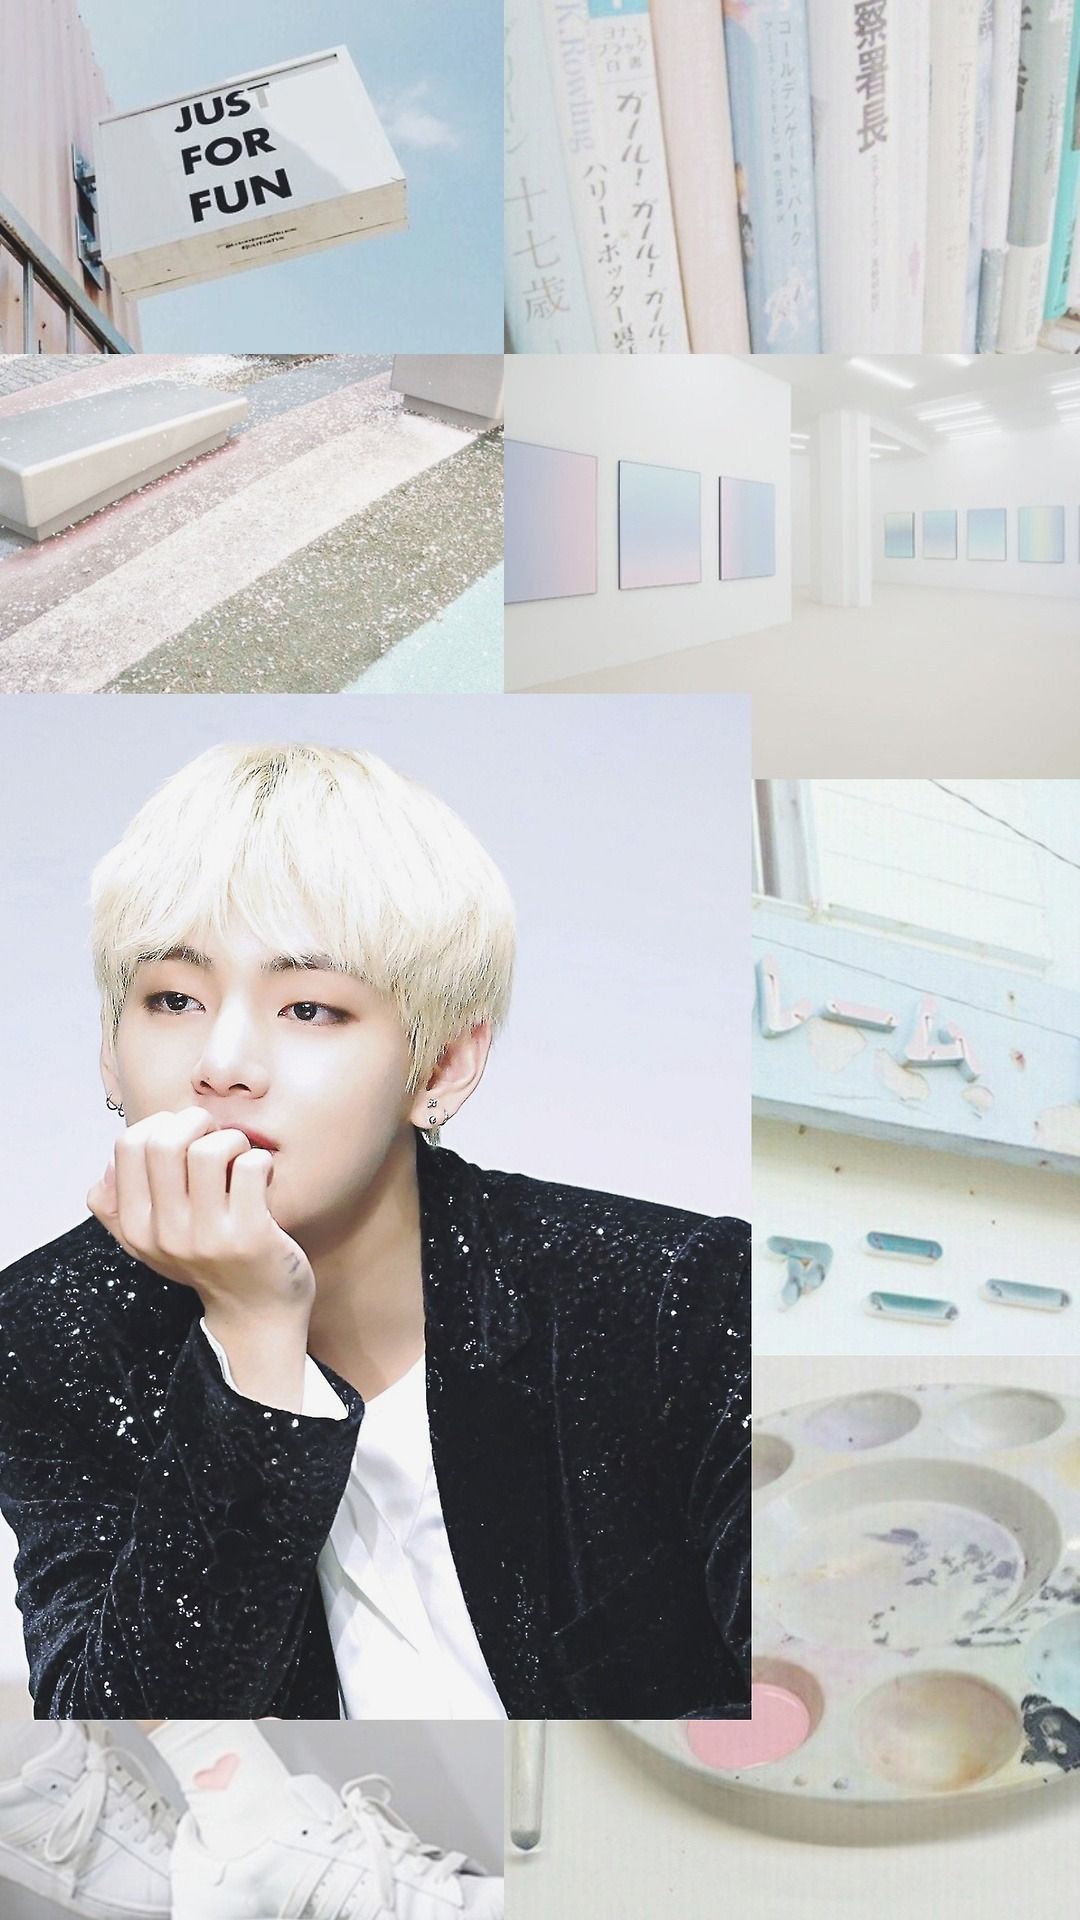 𝓐𝓻𝓶𝔂 𝓕𝓪𝓲𝓻𝔂 - Looking for Bts Taehyung aesthetic wallpaper... |  Facebook